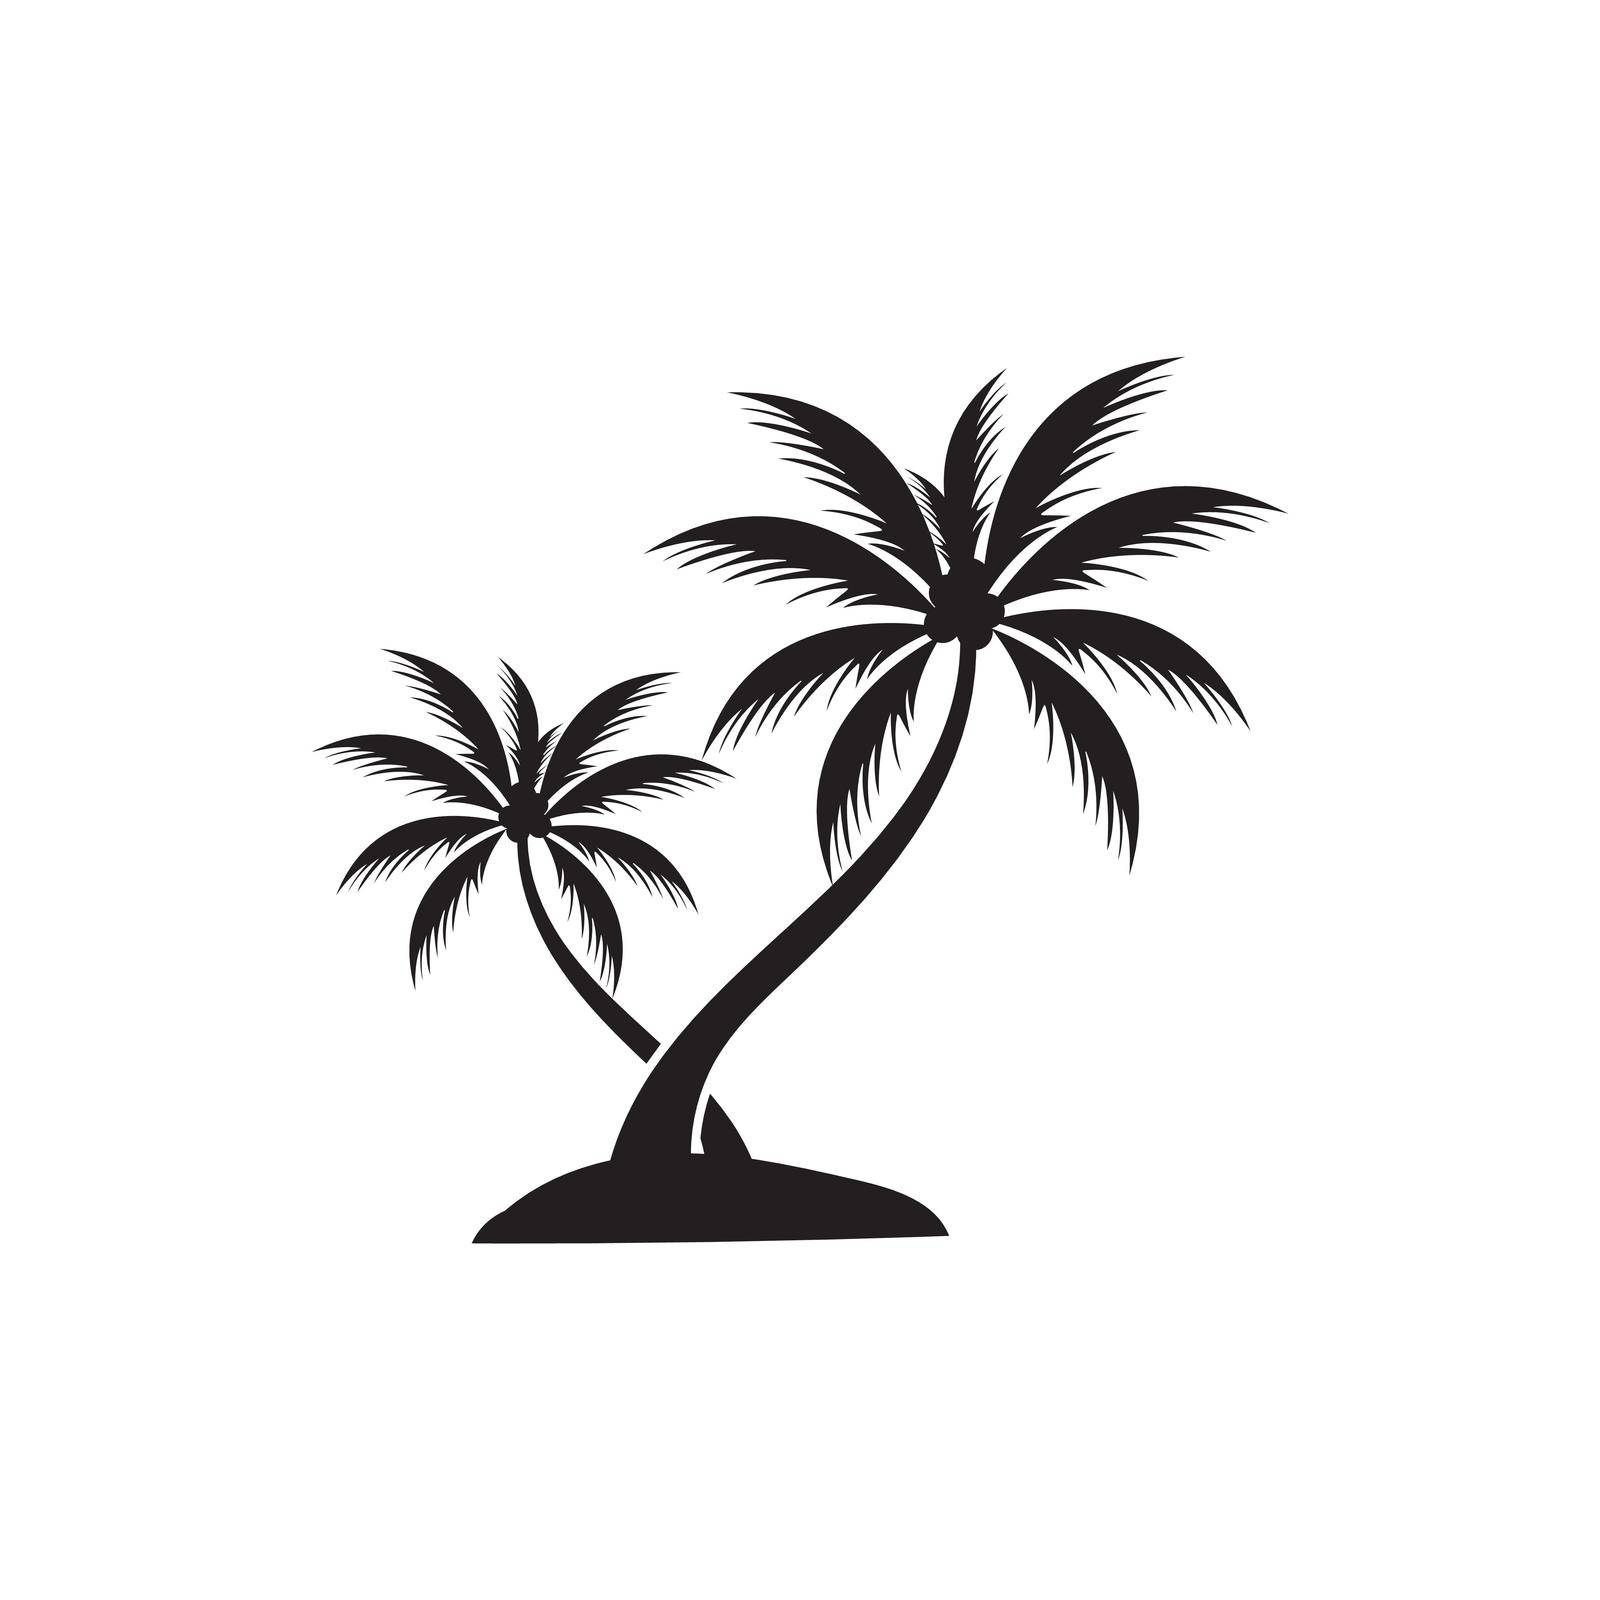 Palm tree summer logo template by Mrsongrphc